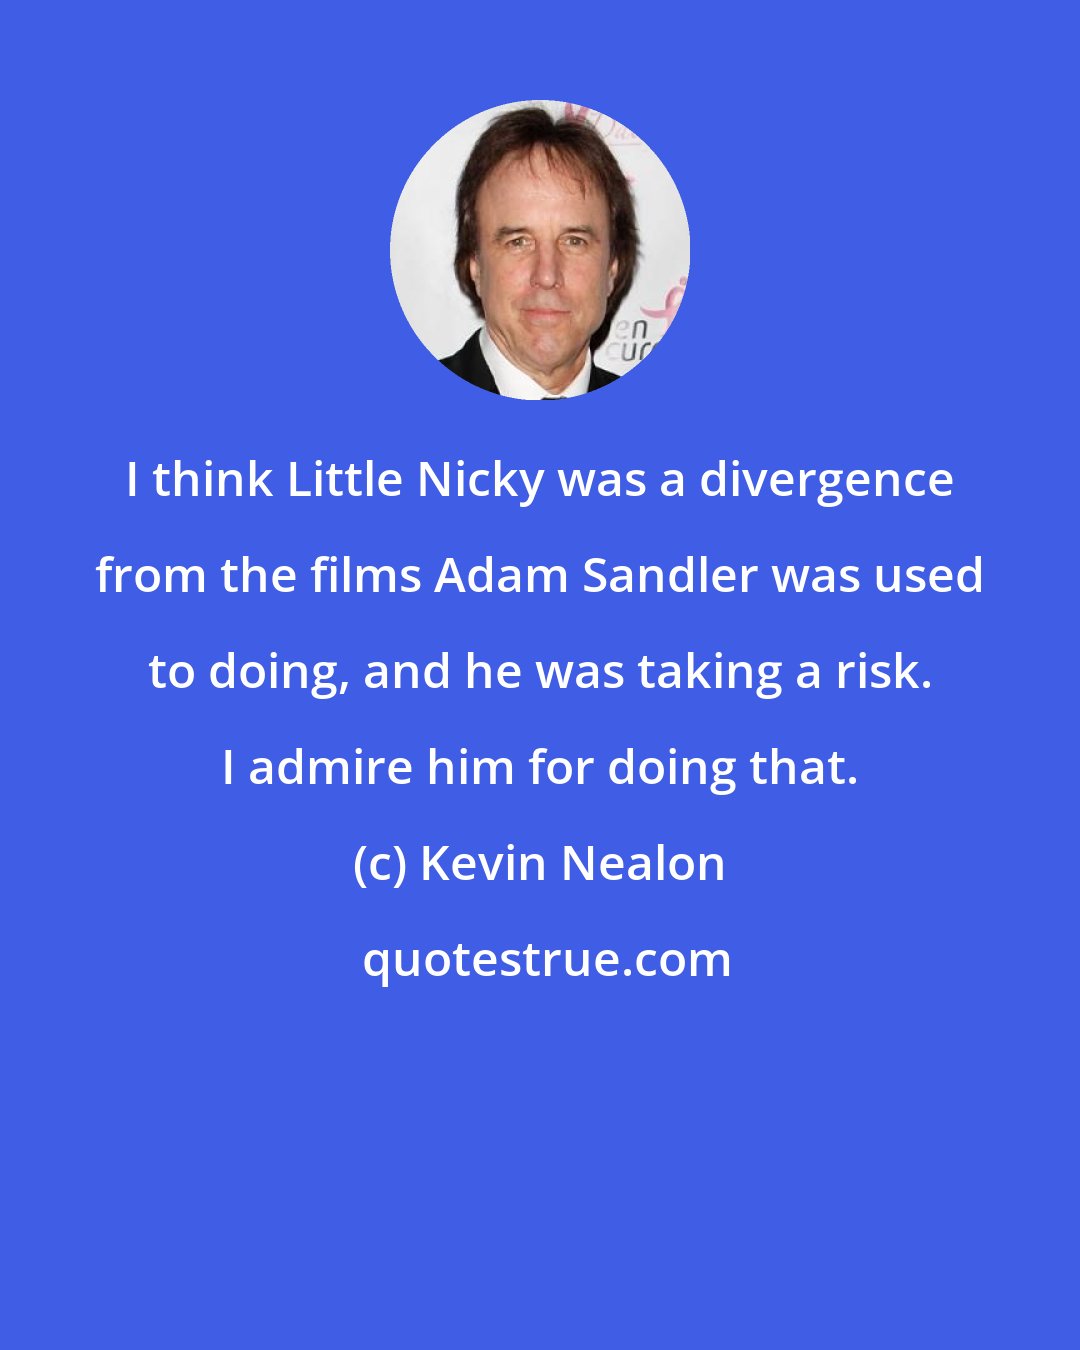 Kevin Nealon: I think Little Nicky was a divergence from the films Adam Sandler was used to doing, and he was taking a risk. I admire him for doing that.